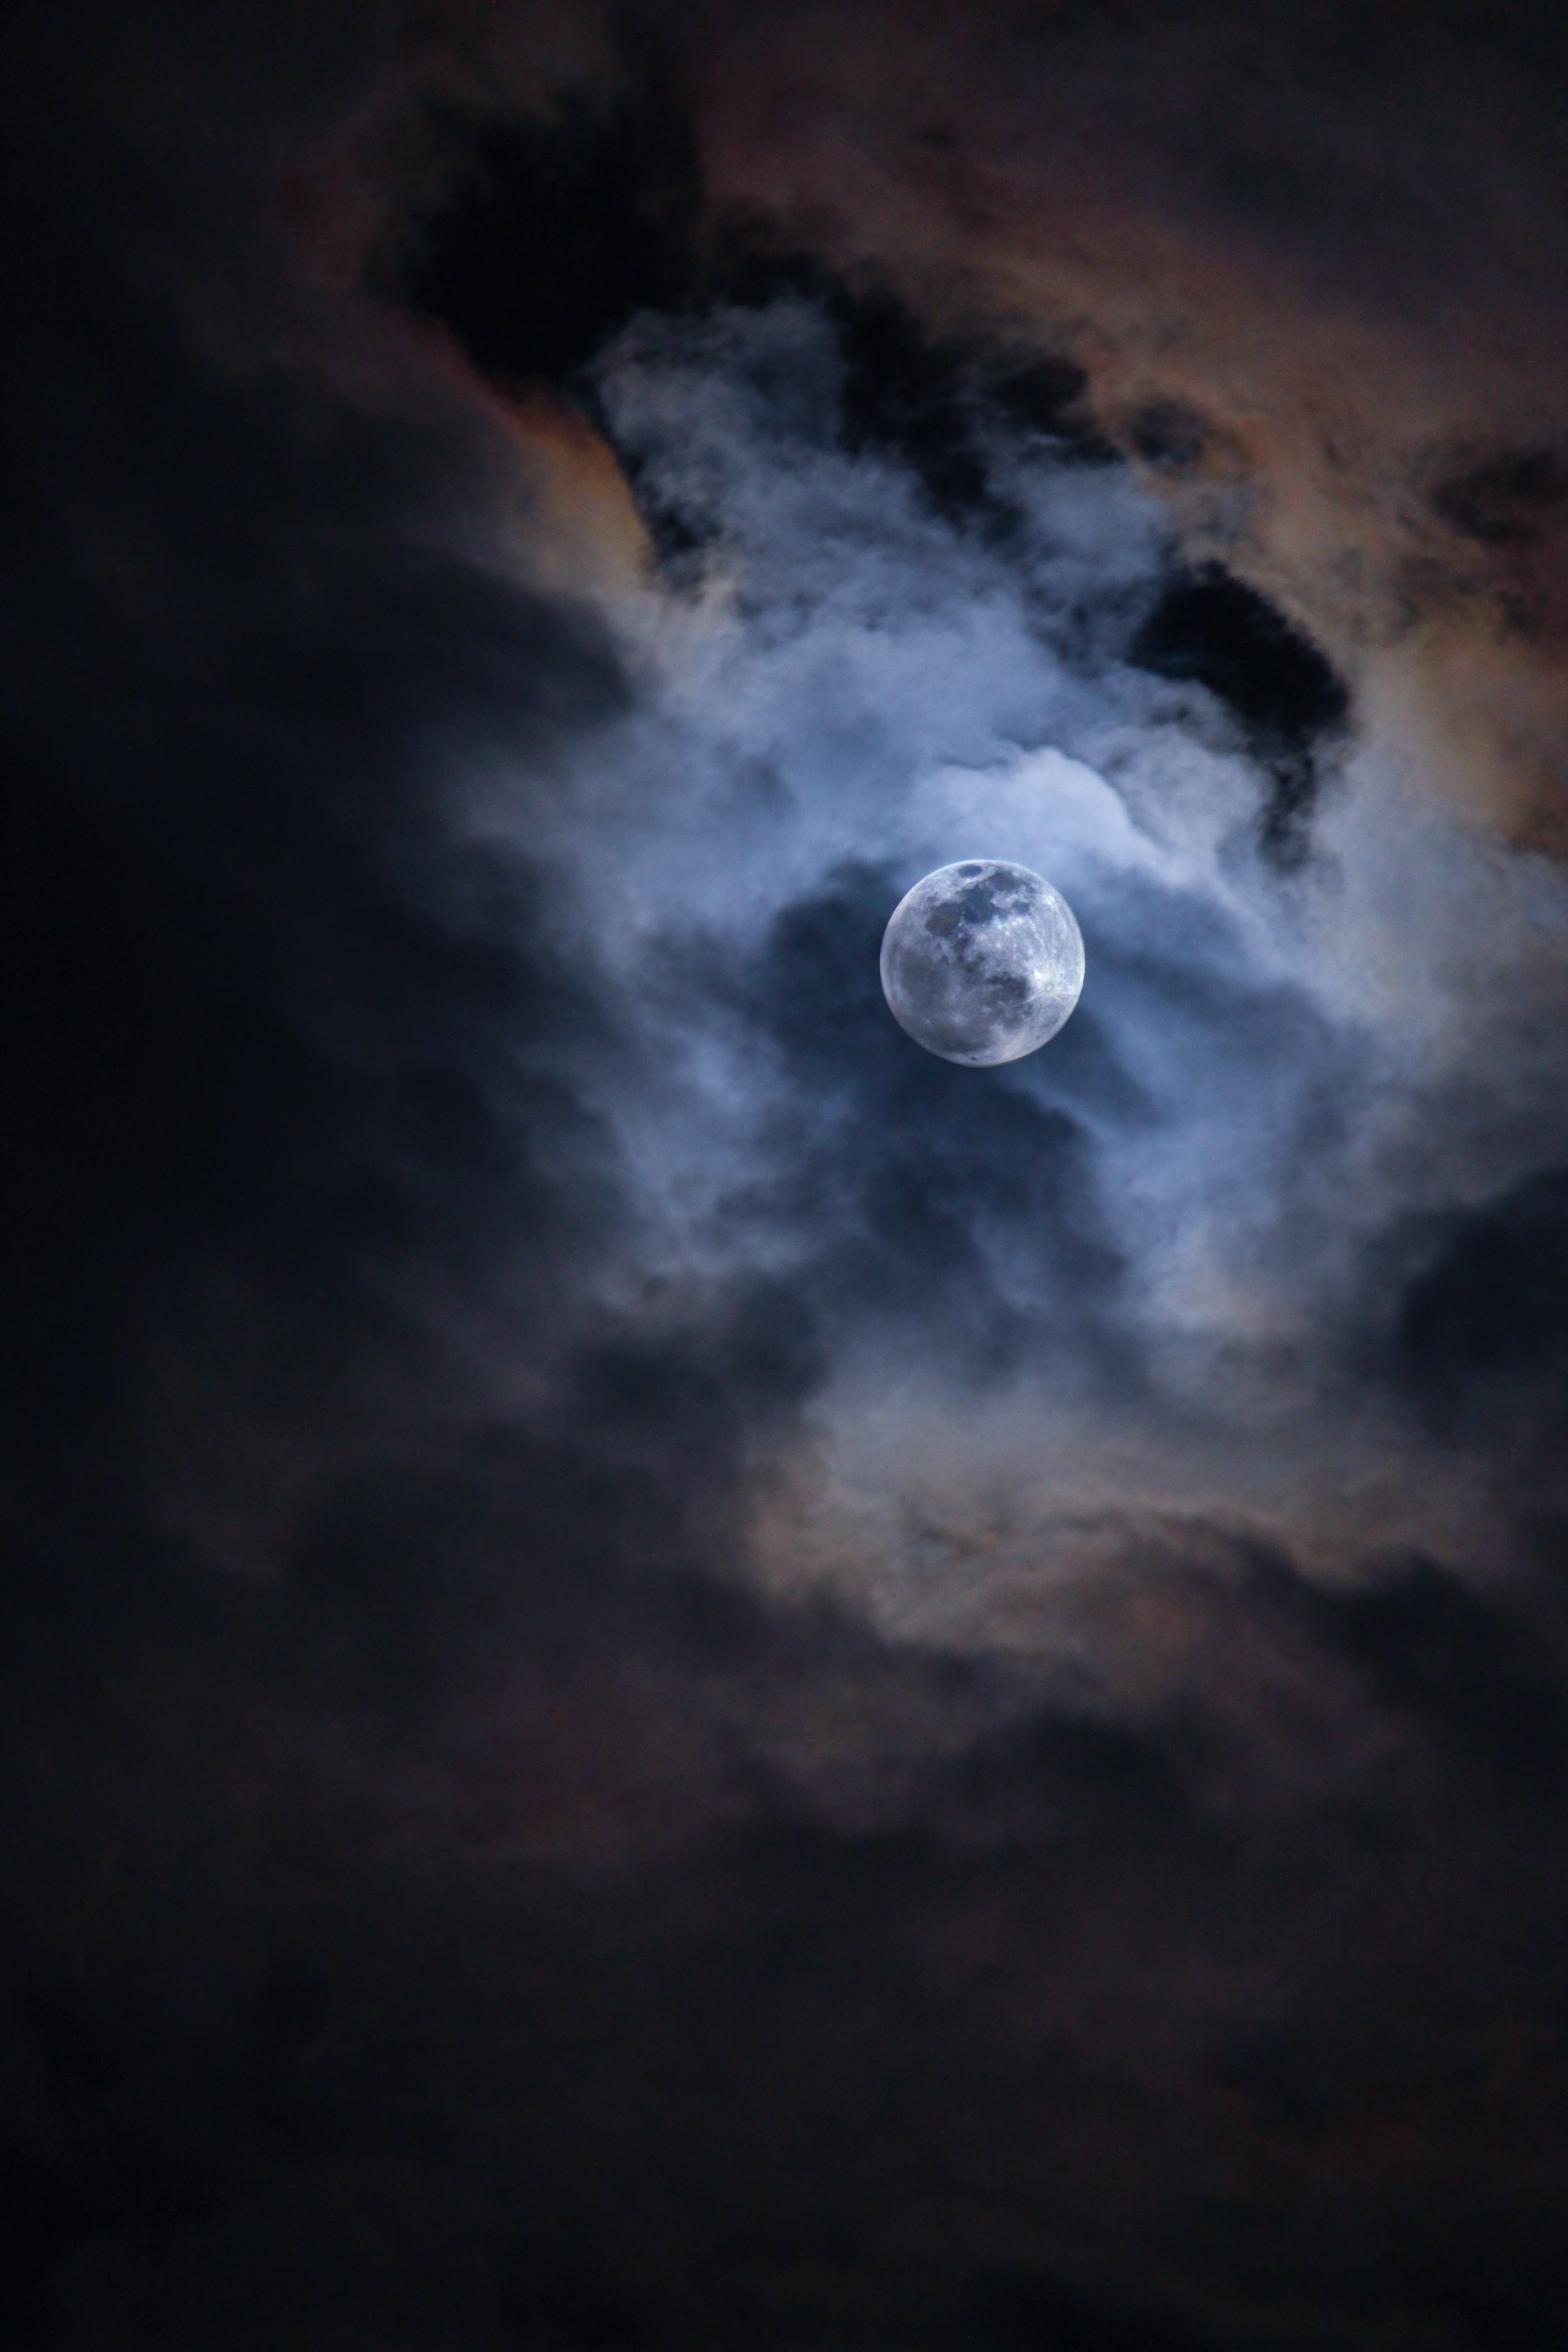 moon, nature, sky, night, clouds, shine, light High Definition image